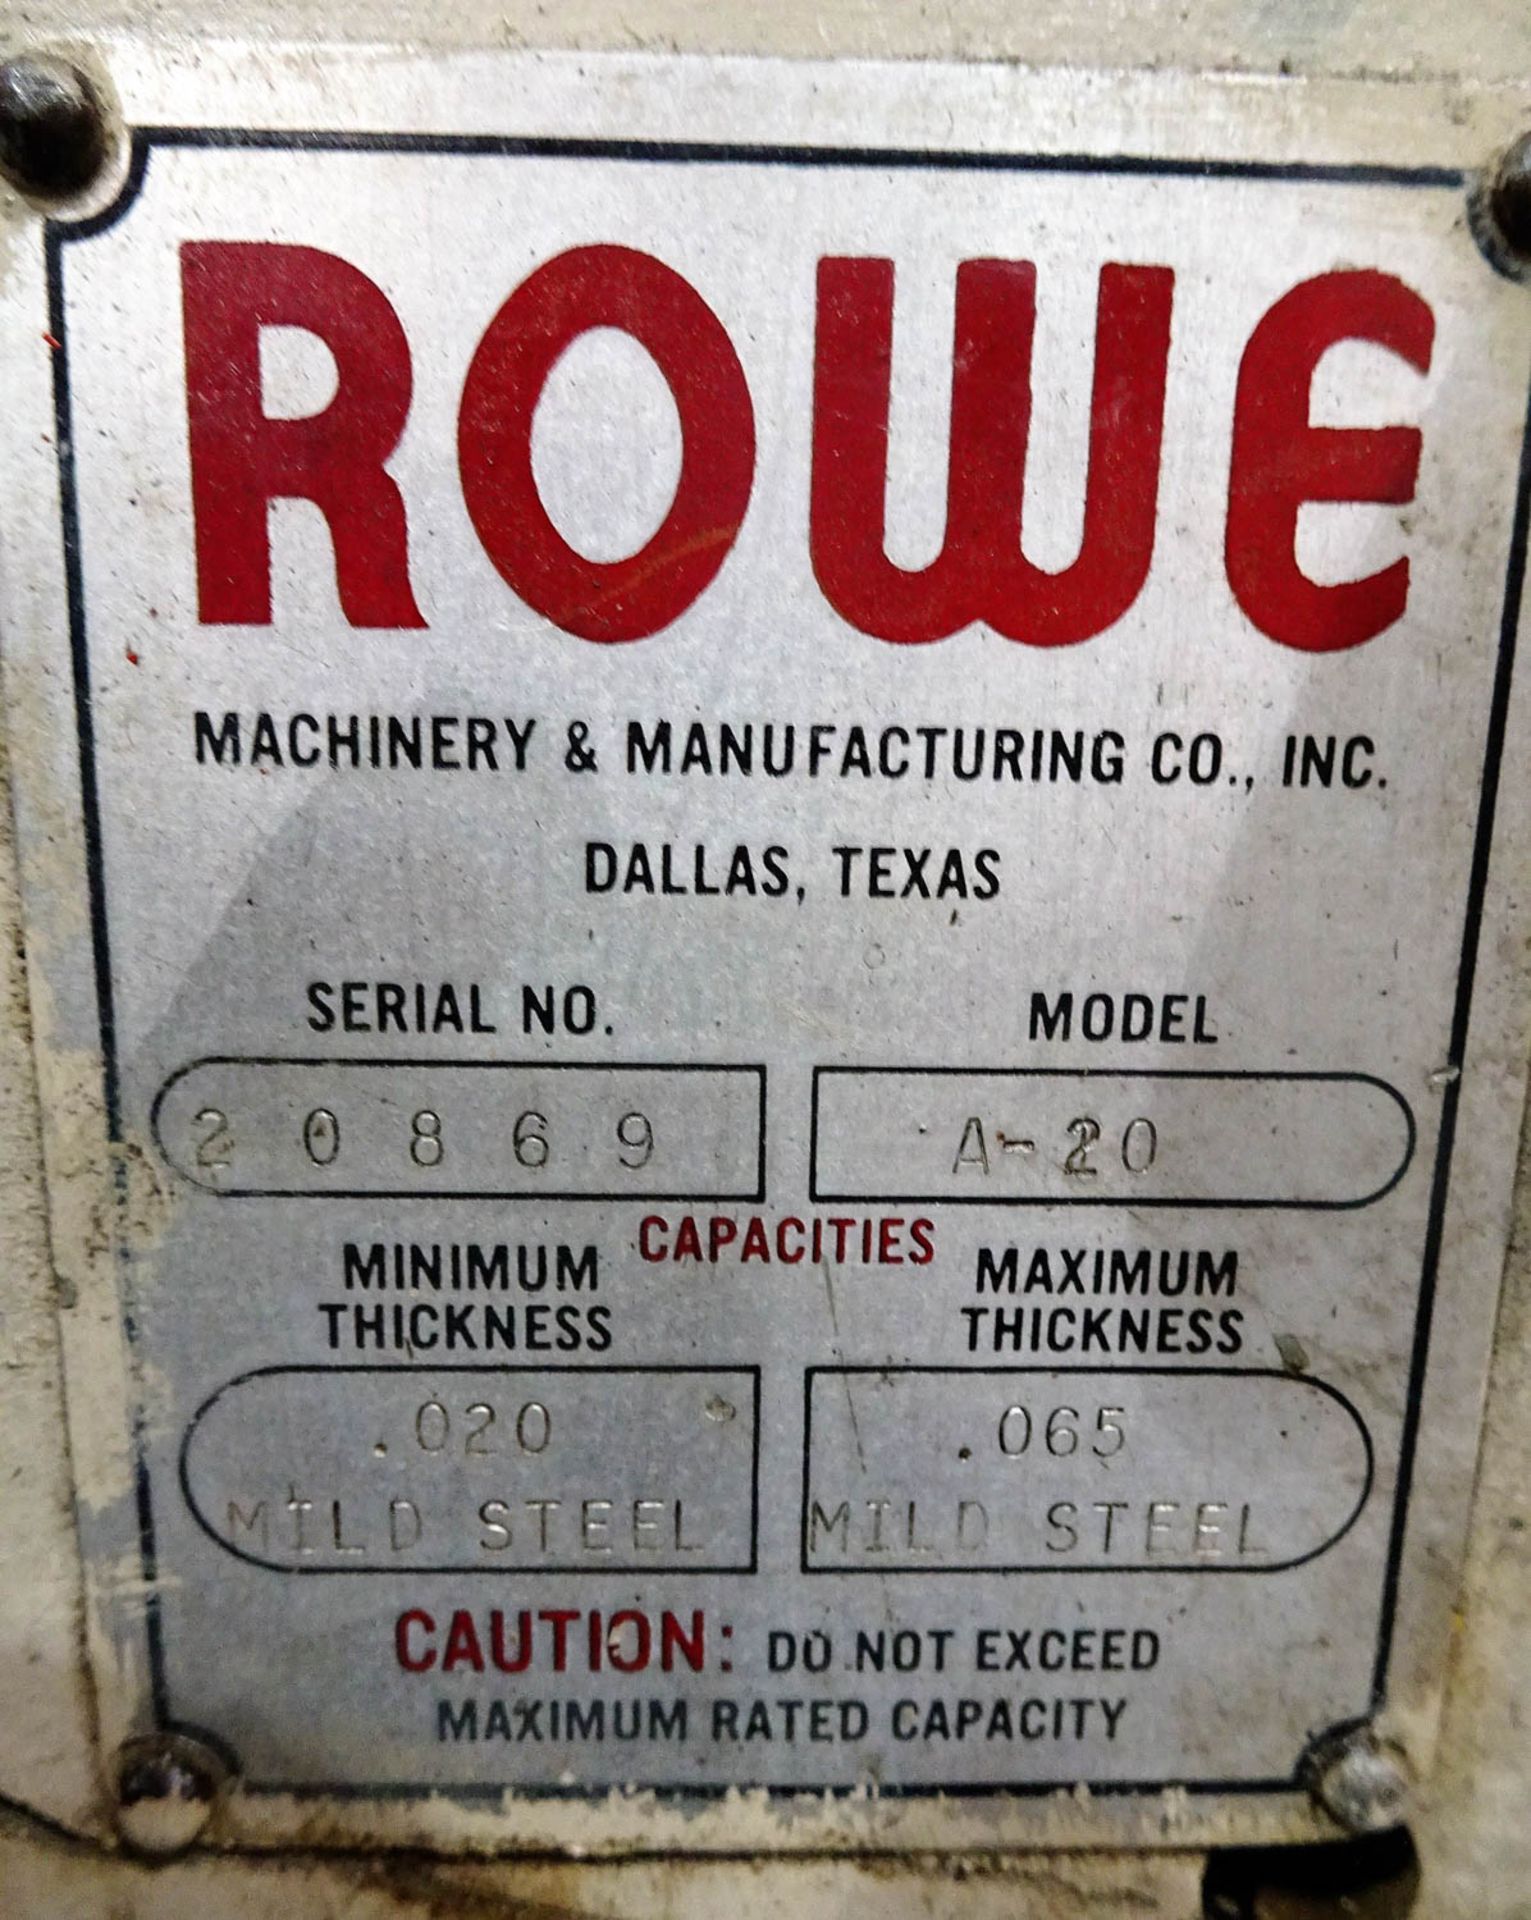 ROWE MDL. A-20 20'' ROLL STRAIGHTENER, MAXIMUM MATERIAL THICKNESS .065'', S/N: 20869 - Image 3 of 3